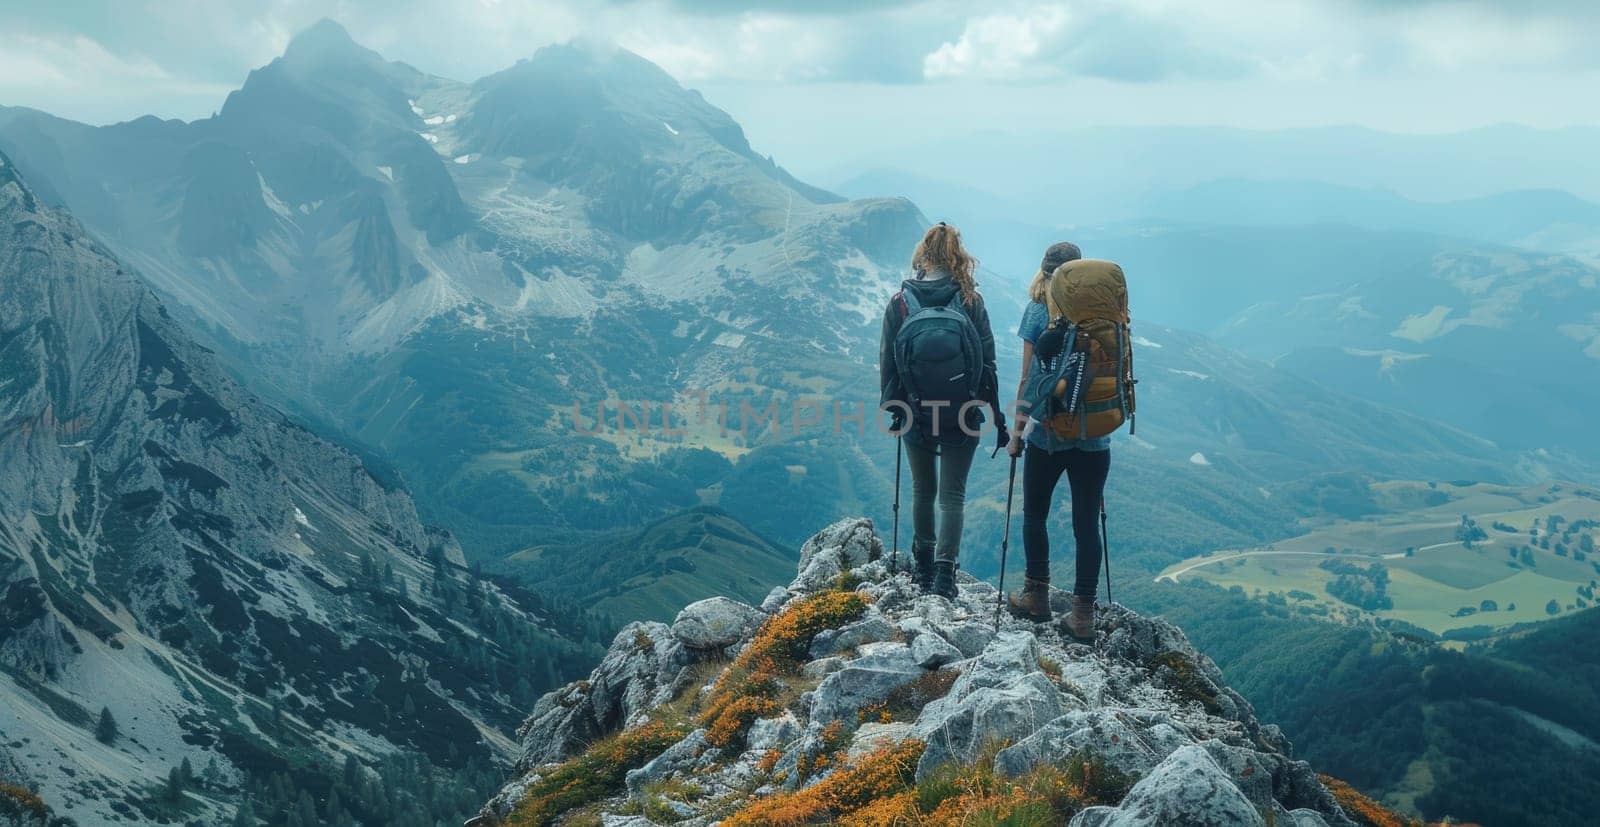 Two people are hiking up a mountain, one of them is wearing a backpack. The mountain is covered in snow and the sky is cloudy. Scene is adventurous and exciting